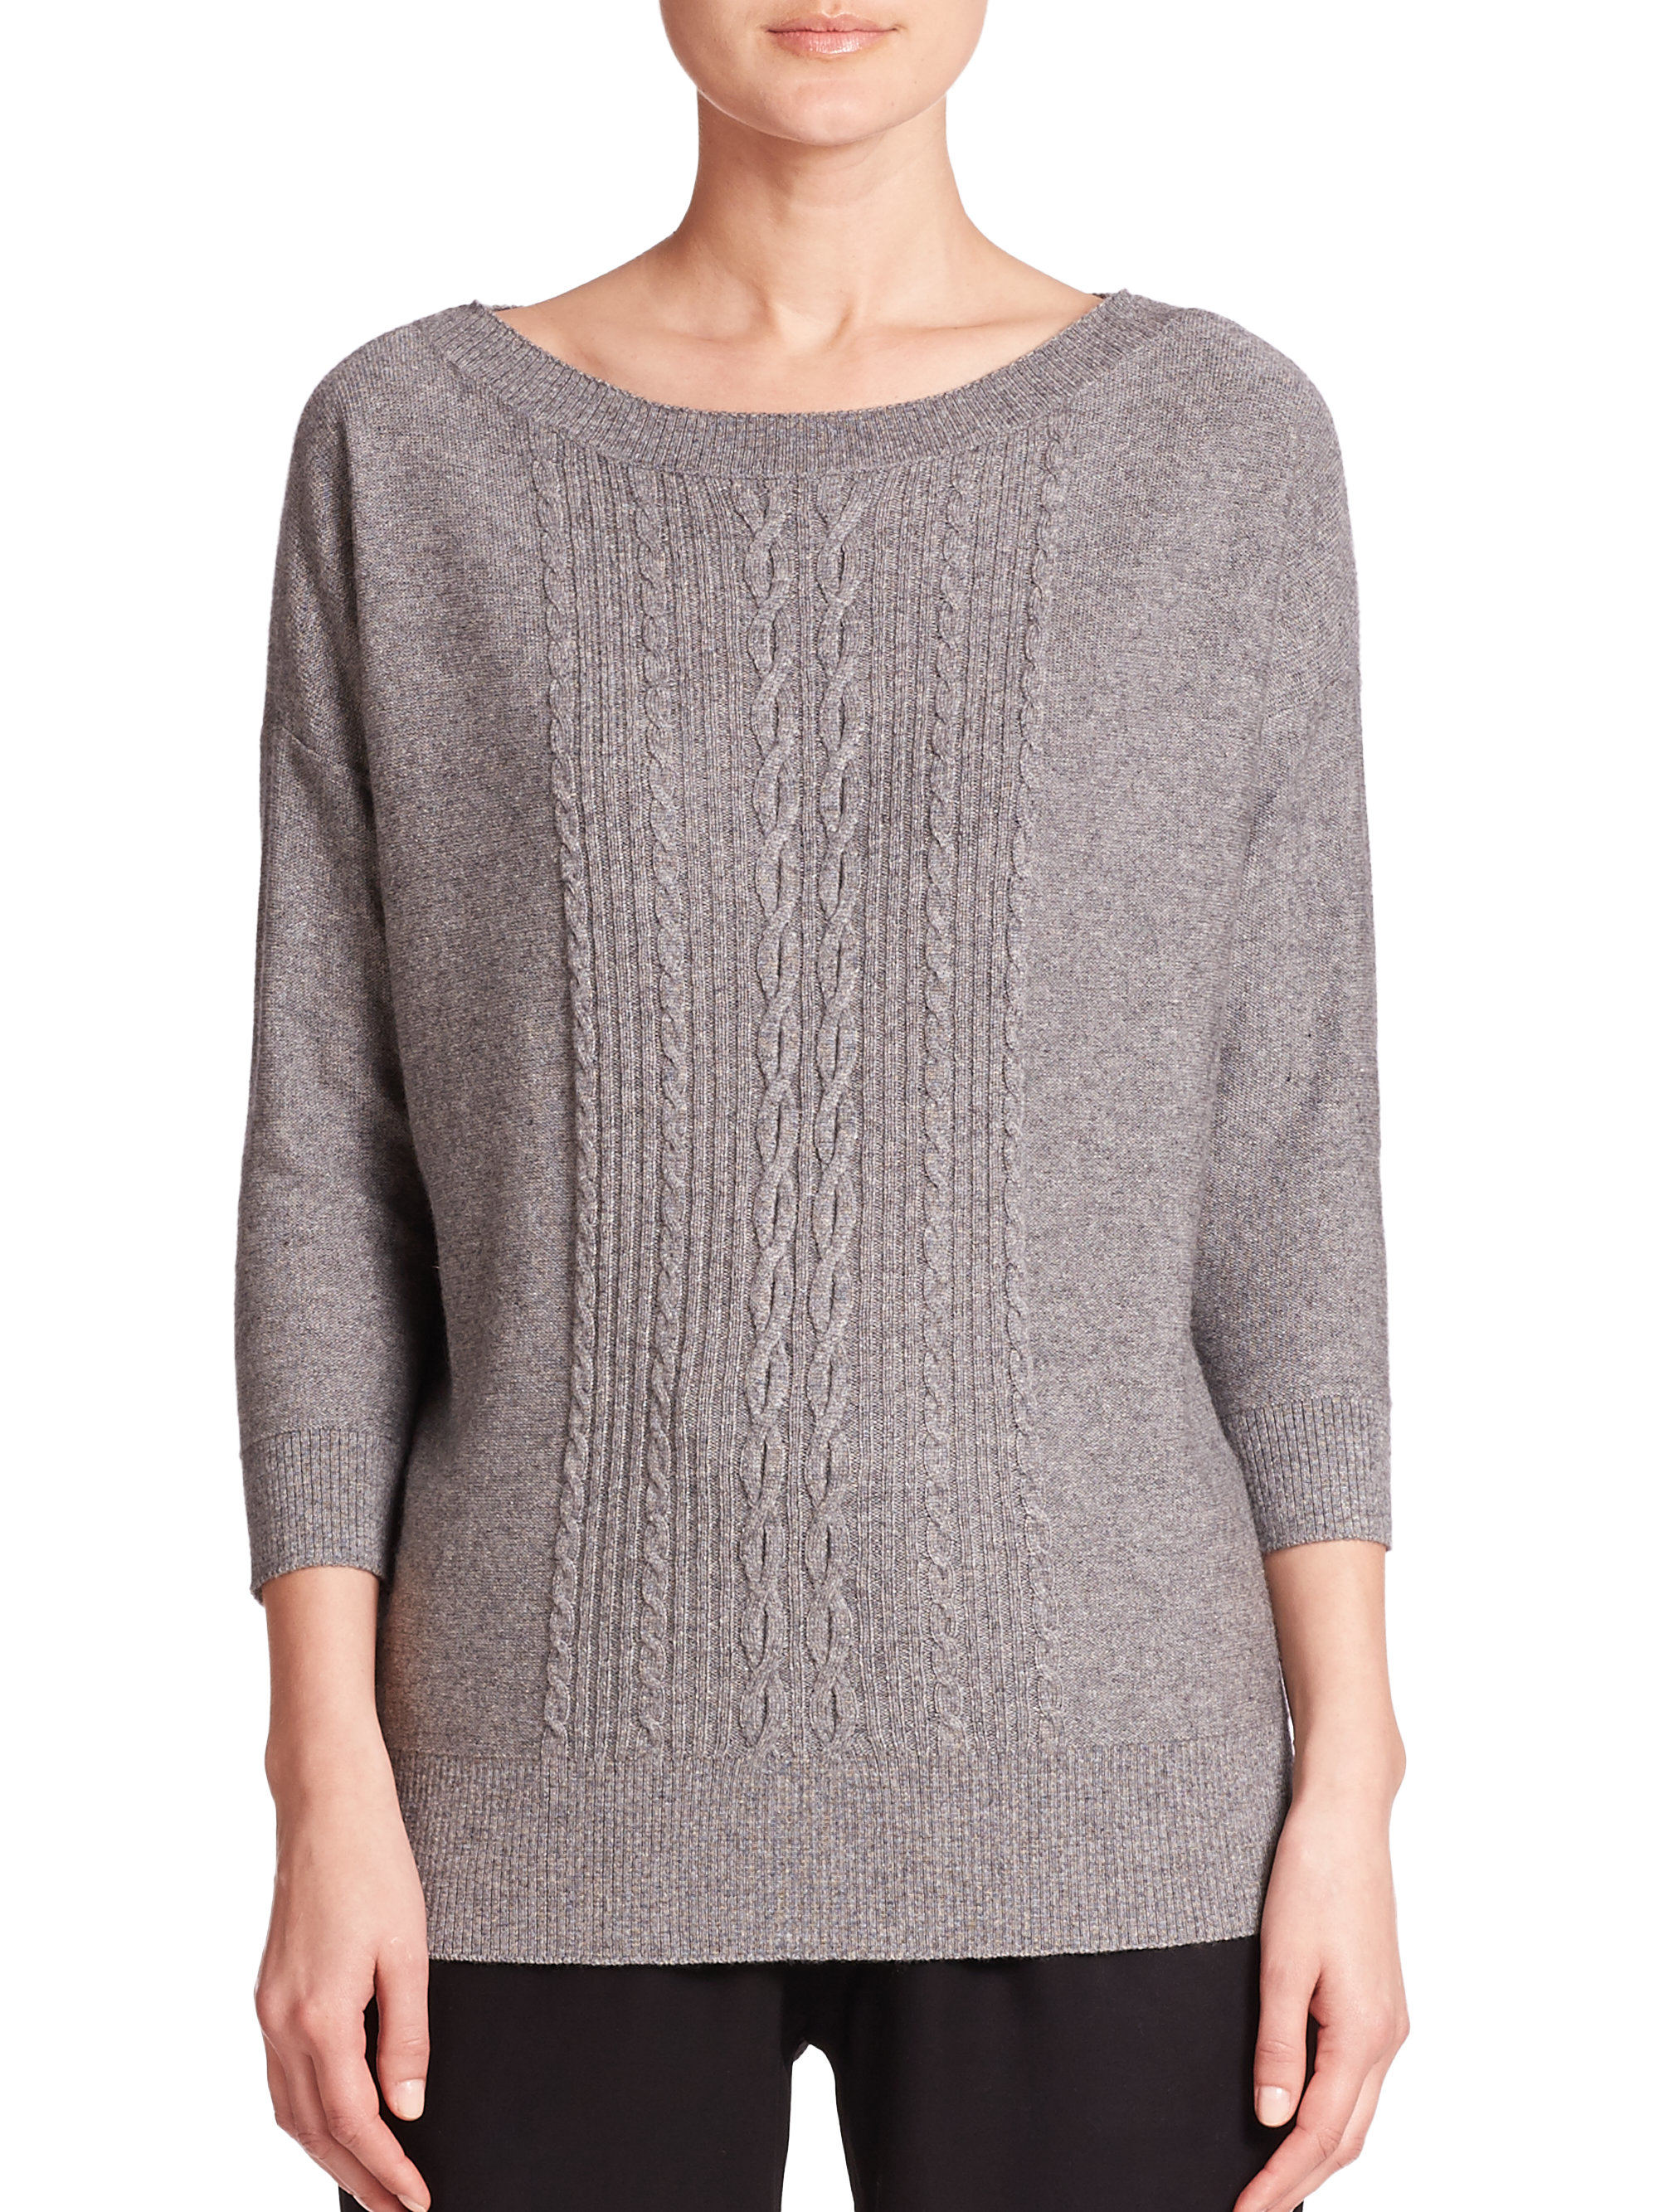 Lyst - Three Dots Cashmere-silk Cable-knit Sweater in Gray